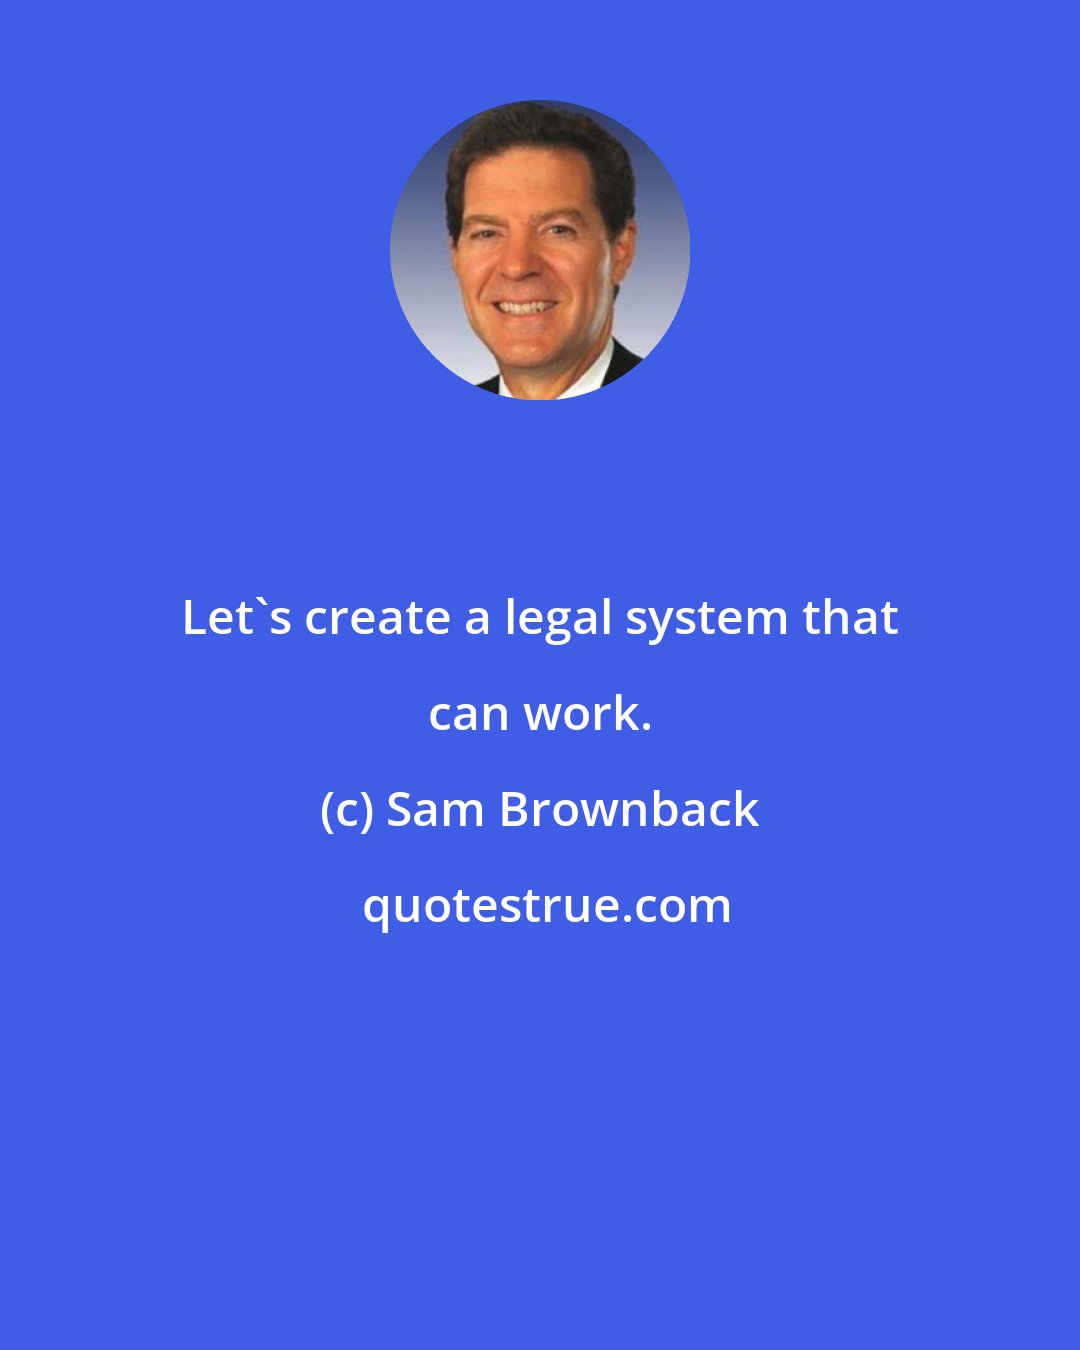 Sam Brownback: Let's create a legal system that can work.